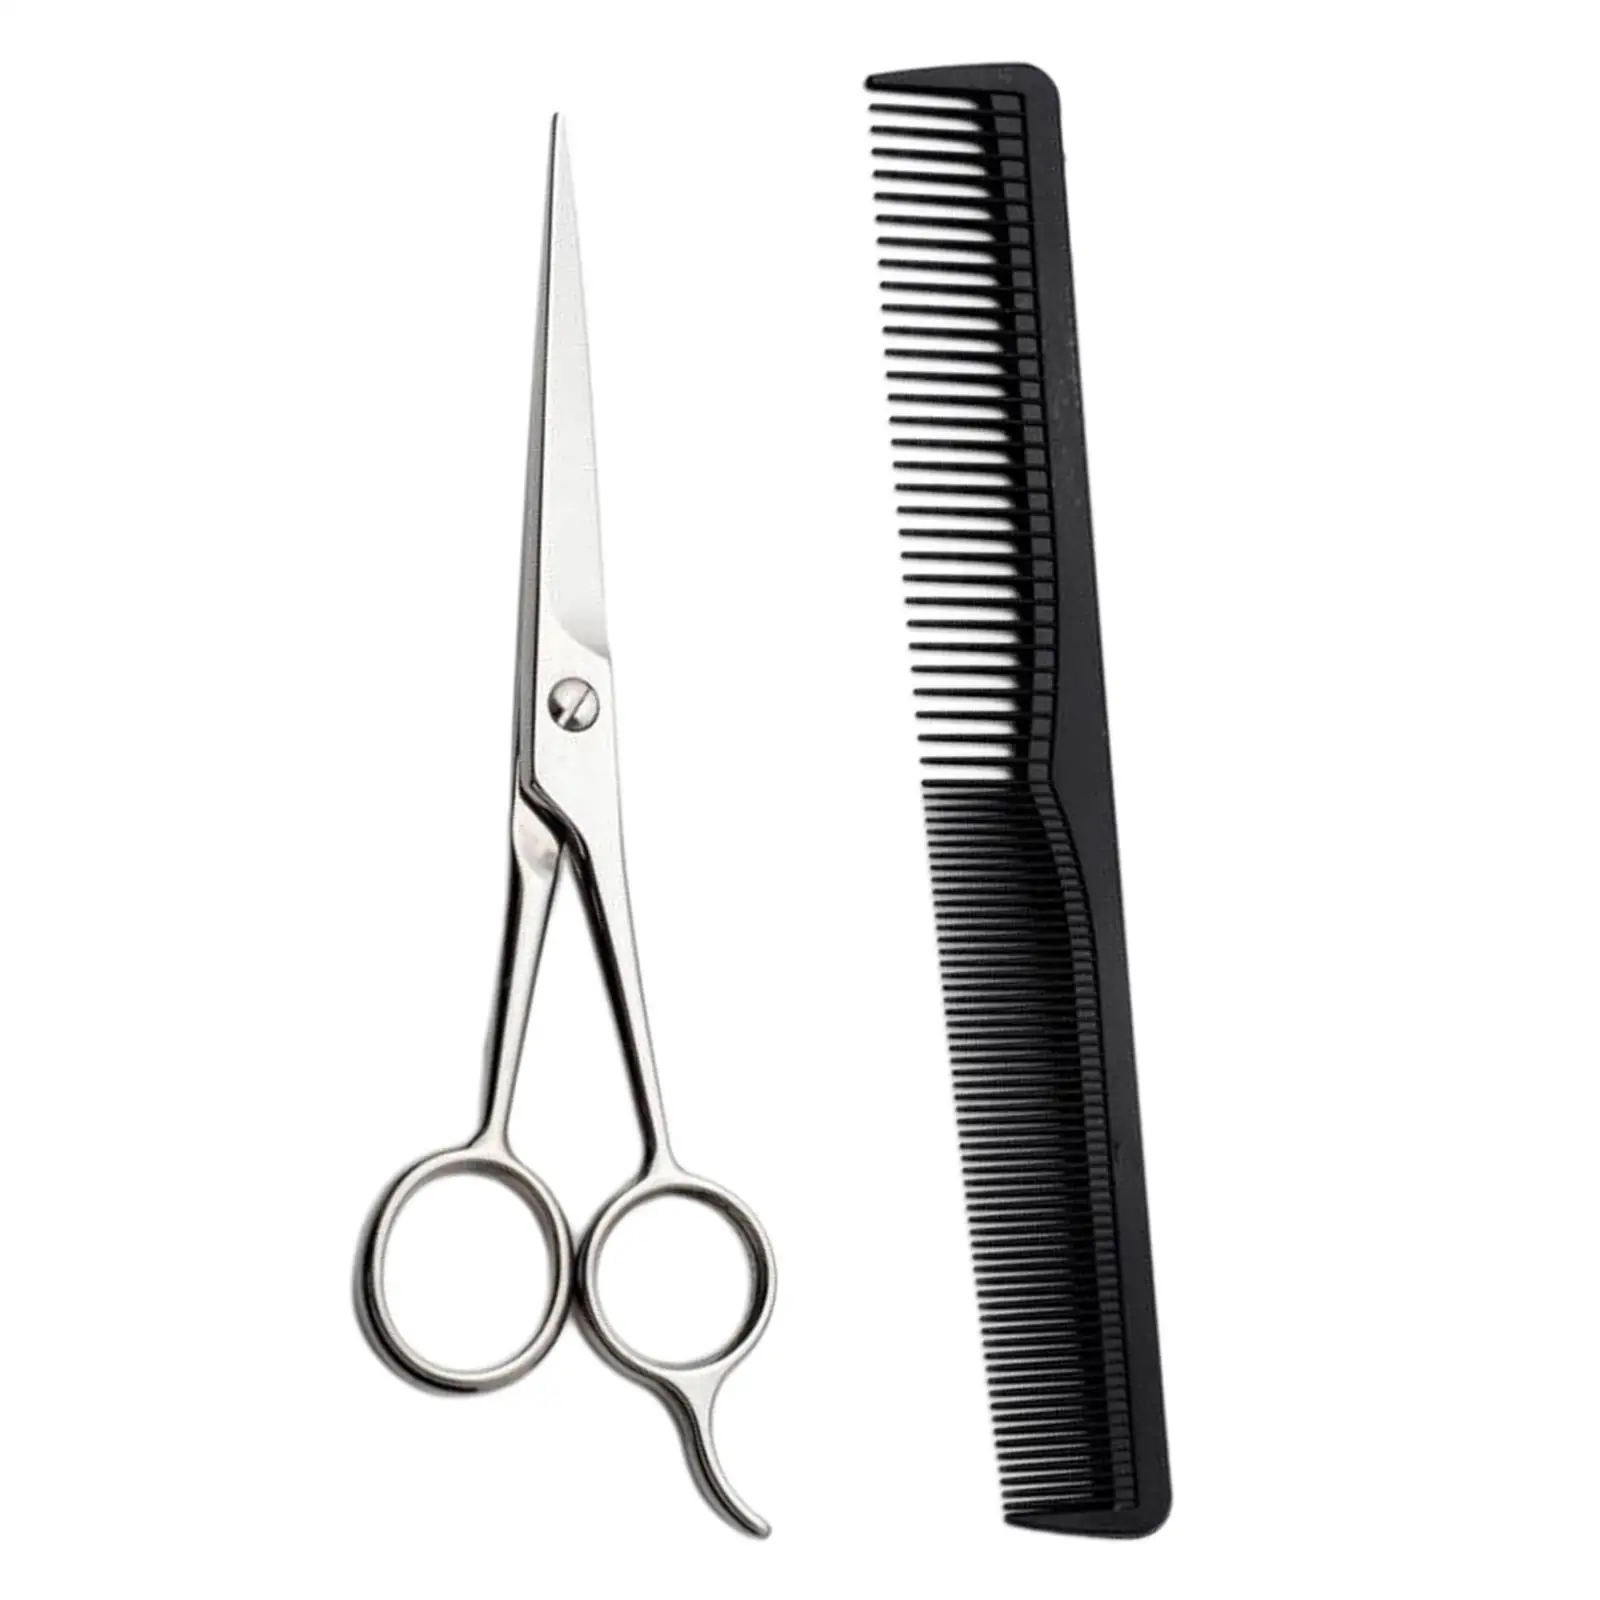 Professional Hair Cutting Scissors Salon Scissors for Hair Cutting with Comb